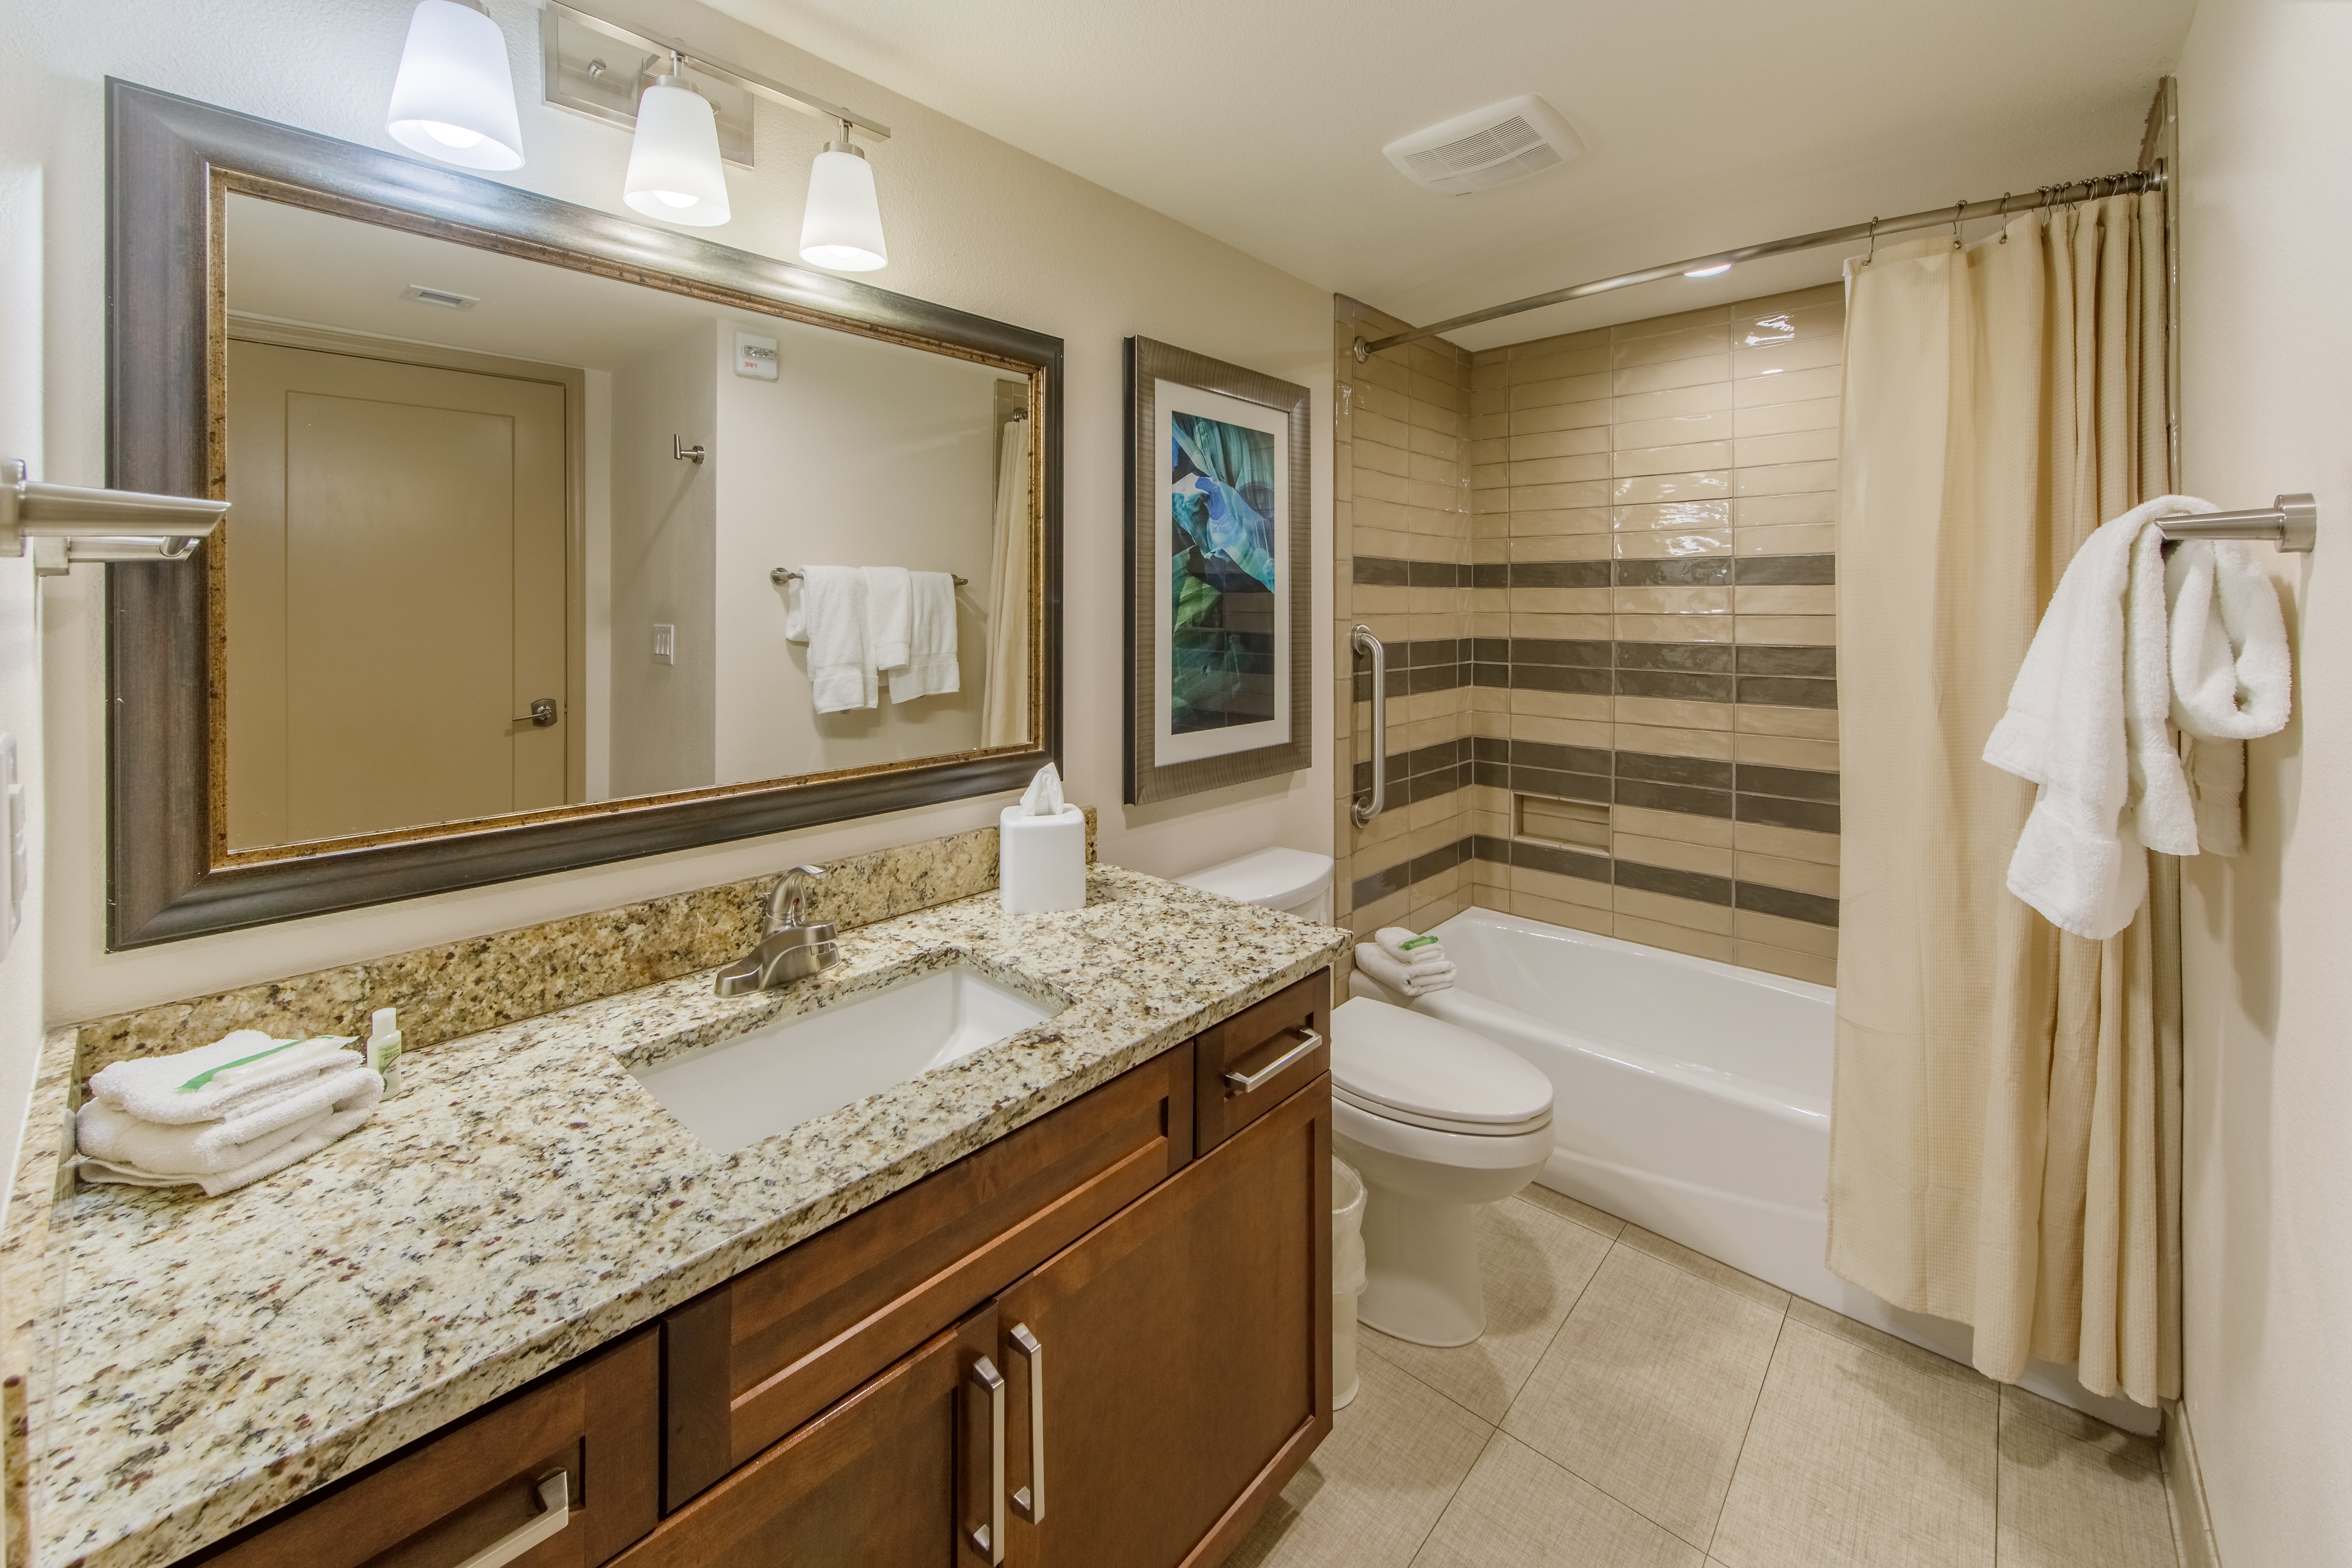 All of our villas offer spacious bathrooms